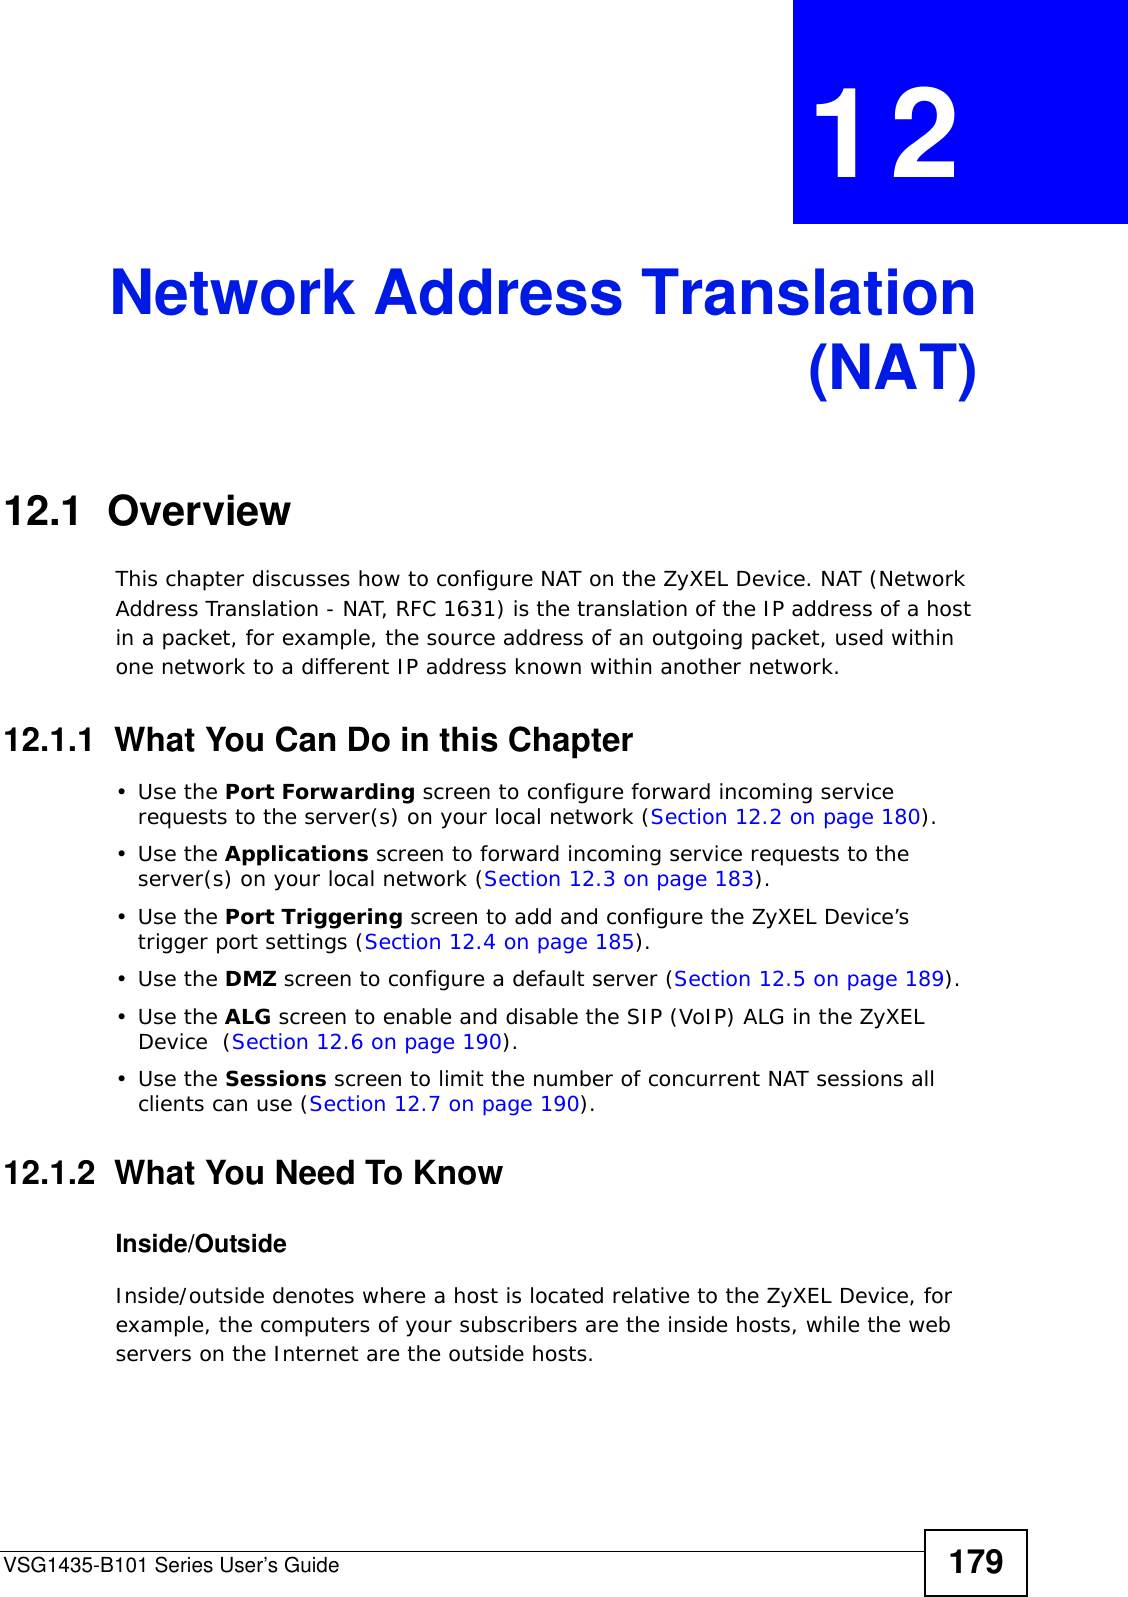 VSG1435-B101 Series User’s Guide 179CHAPTER  12 Network Address Translation(NAT)12.1  OverviewThis chapter discusses how to configure NAT on the ZyXEL Device. NAT (Network Address Translation - NAT, RFC 1631) is the translation of the IP address of a host in a packet, for example, the source address of an outgoing packet, used within one network to a different IP address known within another network.12.1.1  What You Can Do in this Chapter•Use the Port Forwarding screen to configure forward incoming service requests to the server(s) on your local network (Section 12.2 on page 180). •Use the Applications screen to forward incoming service requests to the server(s) on your local network (Section 12.3 on page 183).•Use the Port Triggering screen to add and configure the ZyXEL Device’s trigger port settings (Section 12.4 on page 185).•Use the DMZ screen to configure a default server (Section 12.5 on page 189).•Use the ALG screen to enable and disable the SIP (VoIP) ALG in the ZyXEL Device  (Section 12.6 on page 190).•Use the Sessions screen to limit the number of concurrent NAT sessions all clients can use (Section 12.7 on page 190). 12.1.2  What You Need To KnowInside/OutsideInside/outside denotes where a host is located relative to the ZyXEL Device, for example, the computers of your subscribers are the inside hosts, while the web servers on the Internet are the outside hosts. 